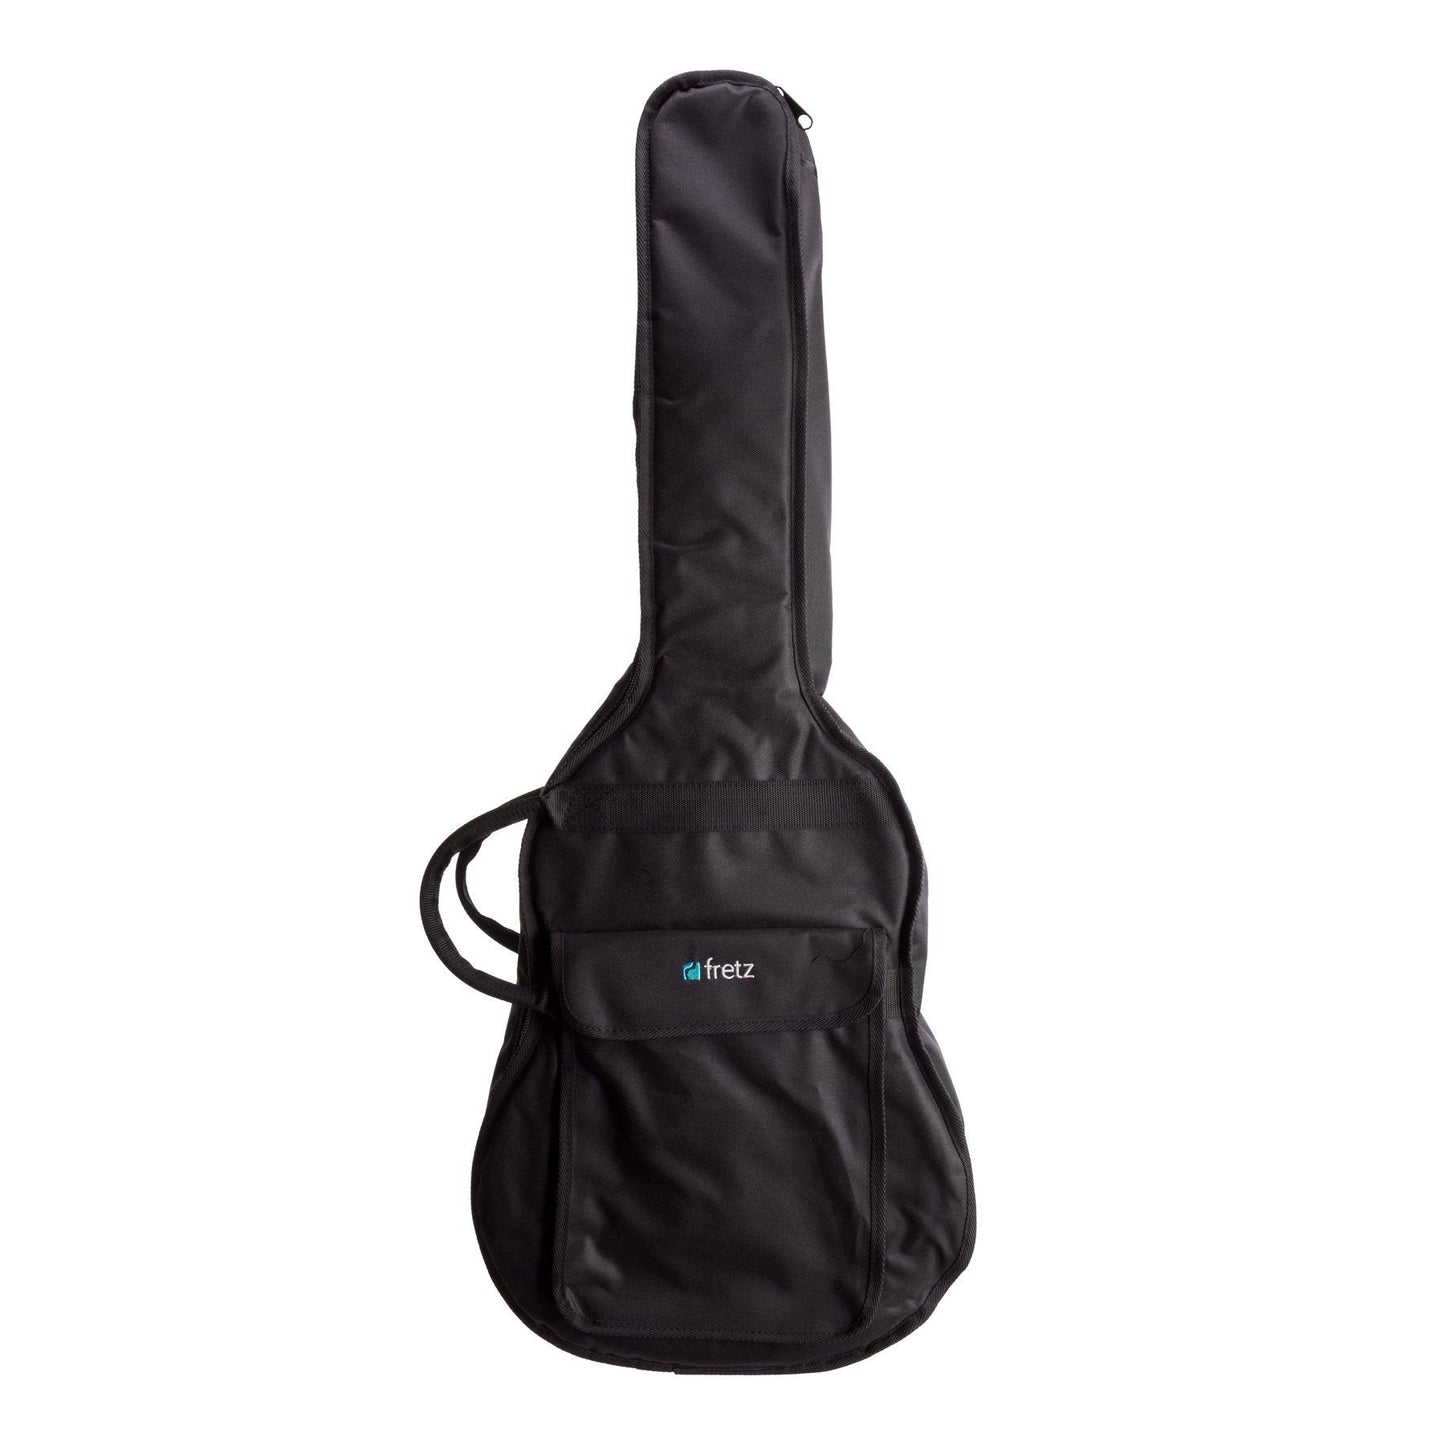 Load image into Gallery viewer, Fretz Deluxe Classical Guitar Gig Bag (Black)
